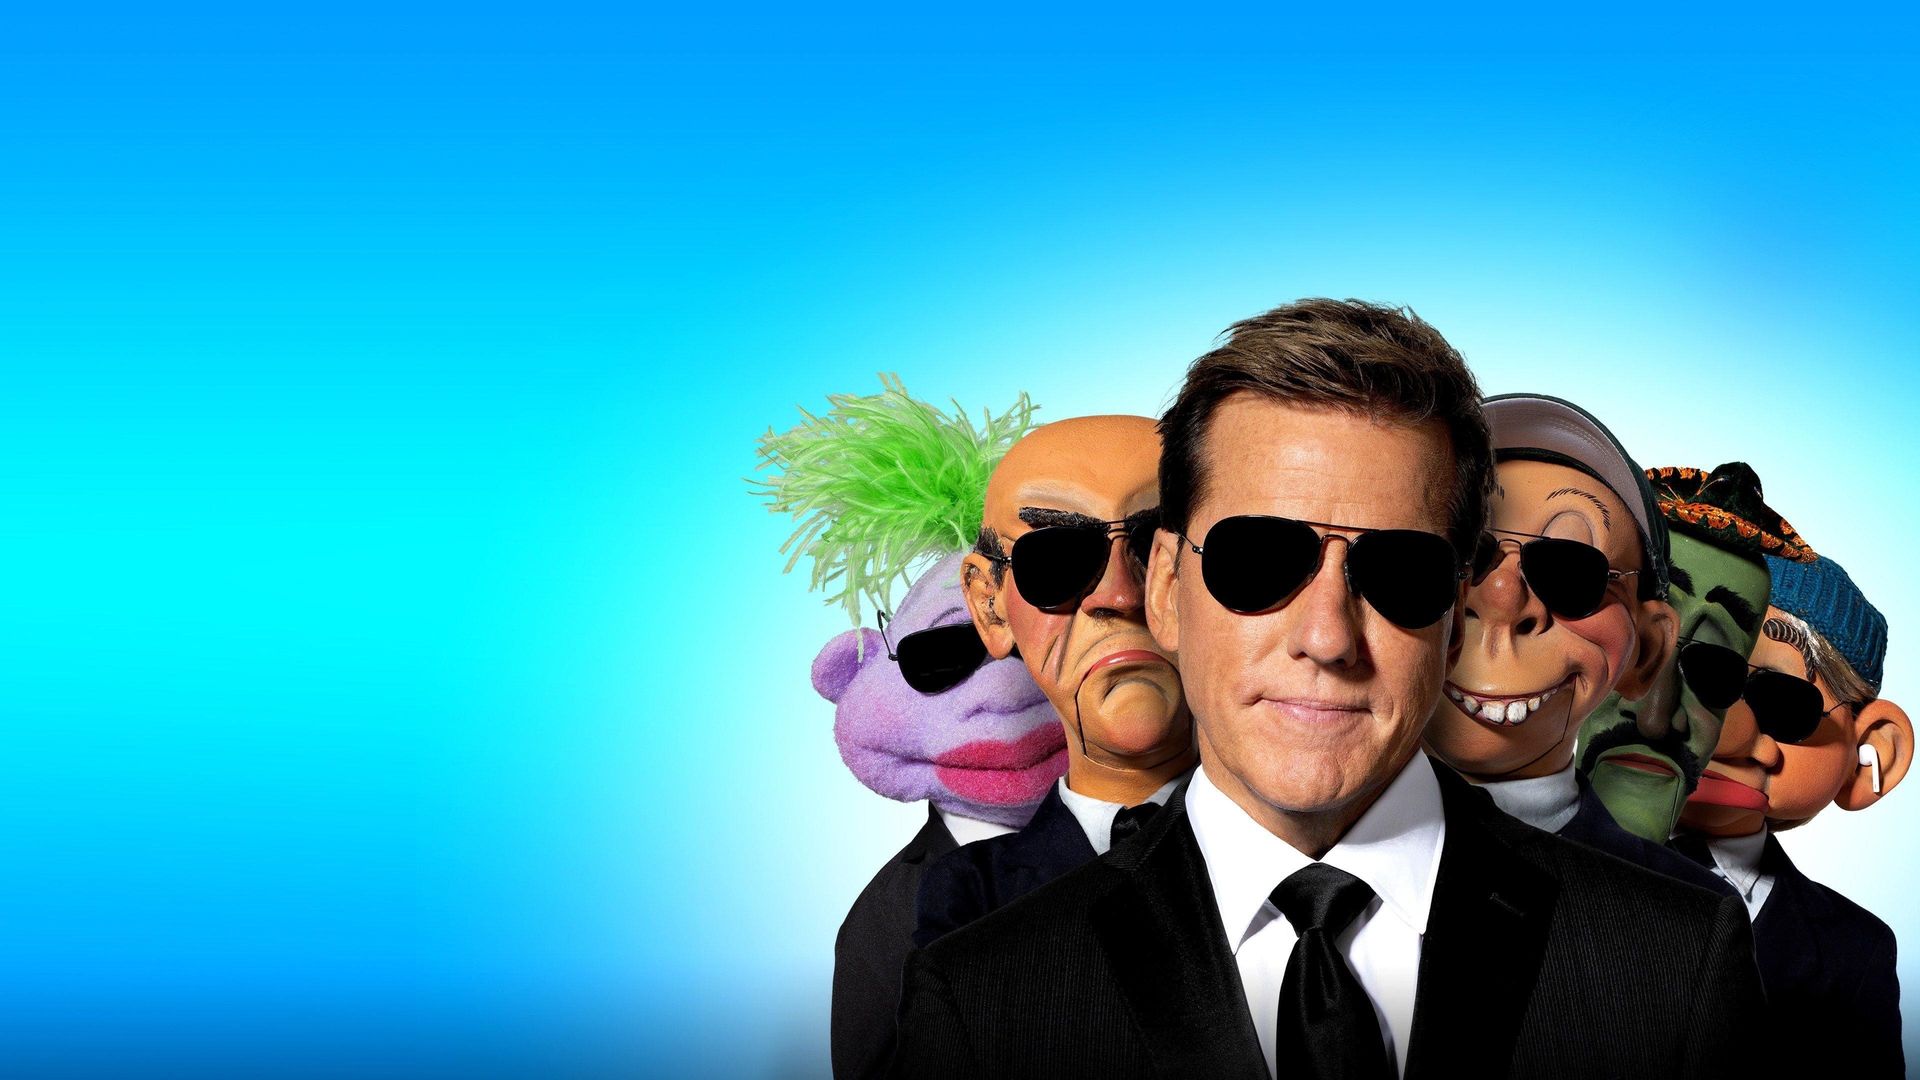 Jeff Dunham: Me the People background